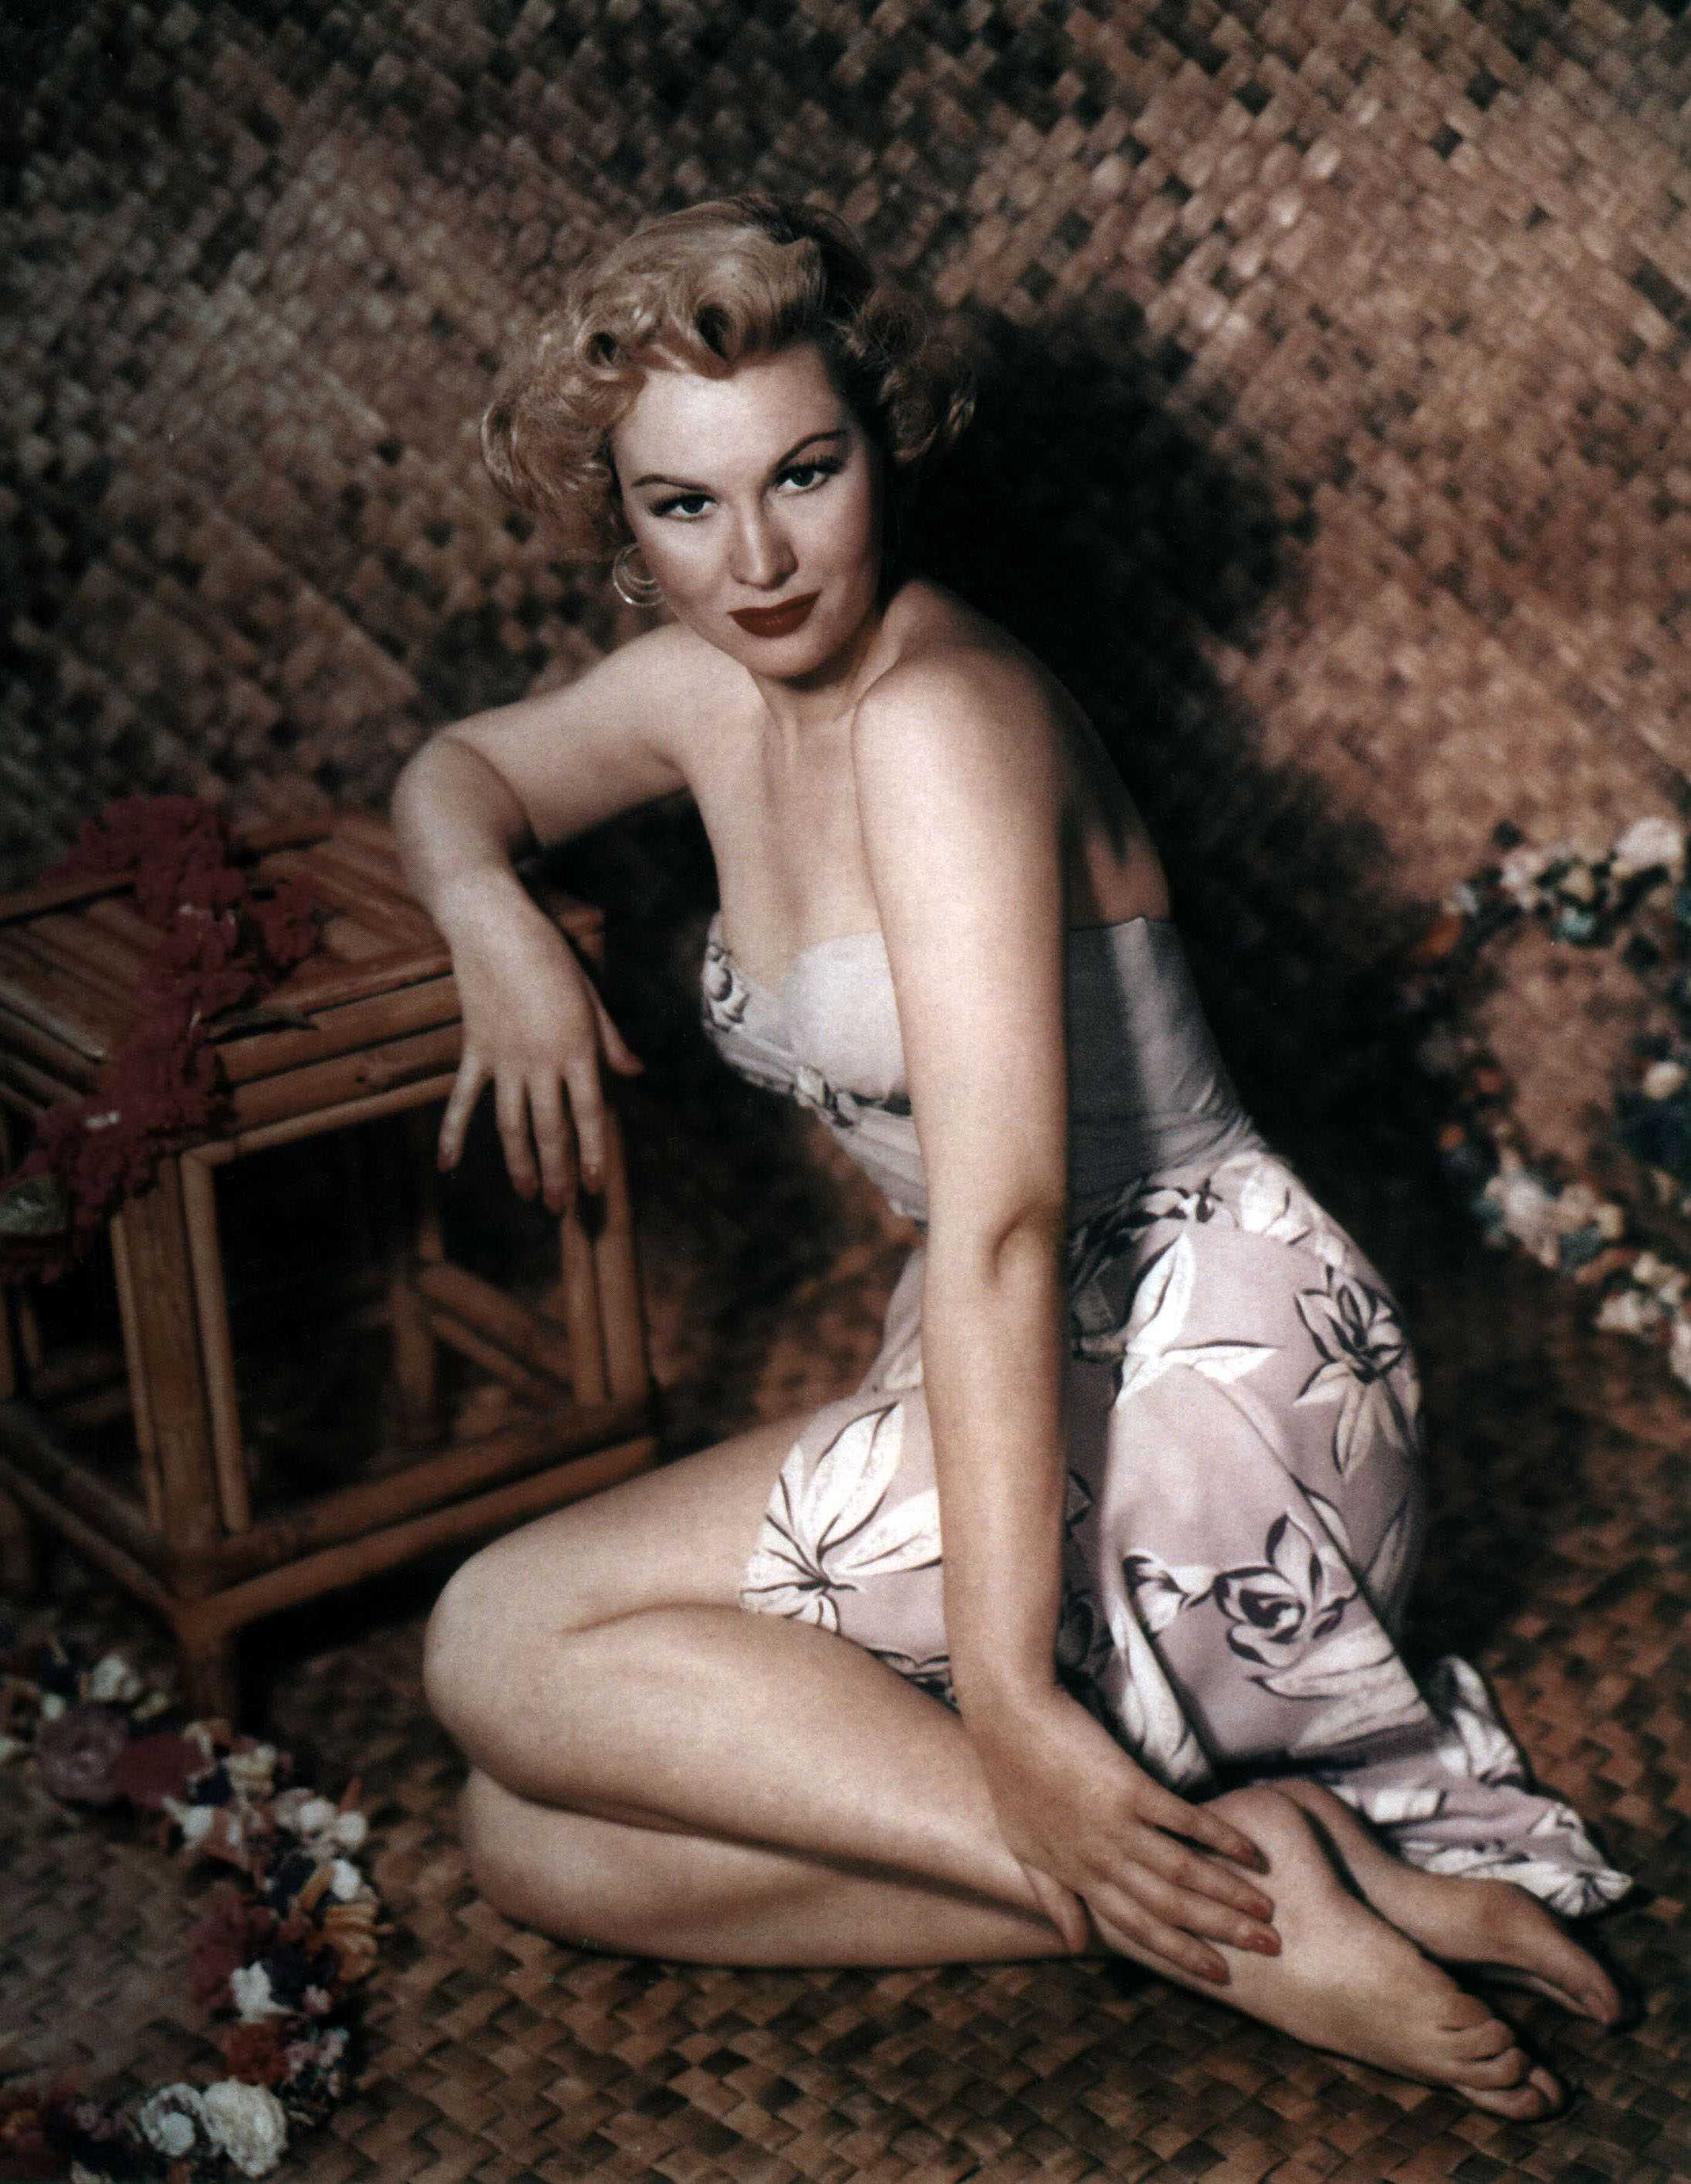 david james potter recommends Virginia Mayo Legs